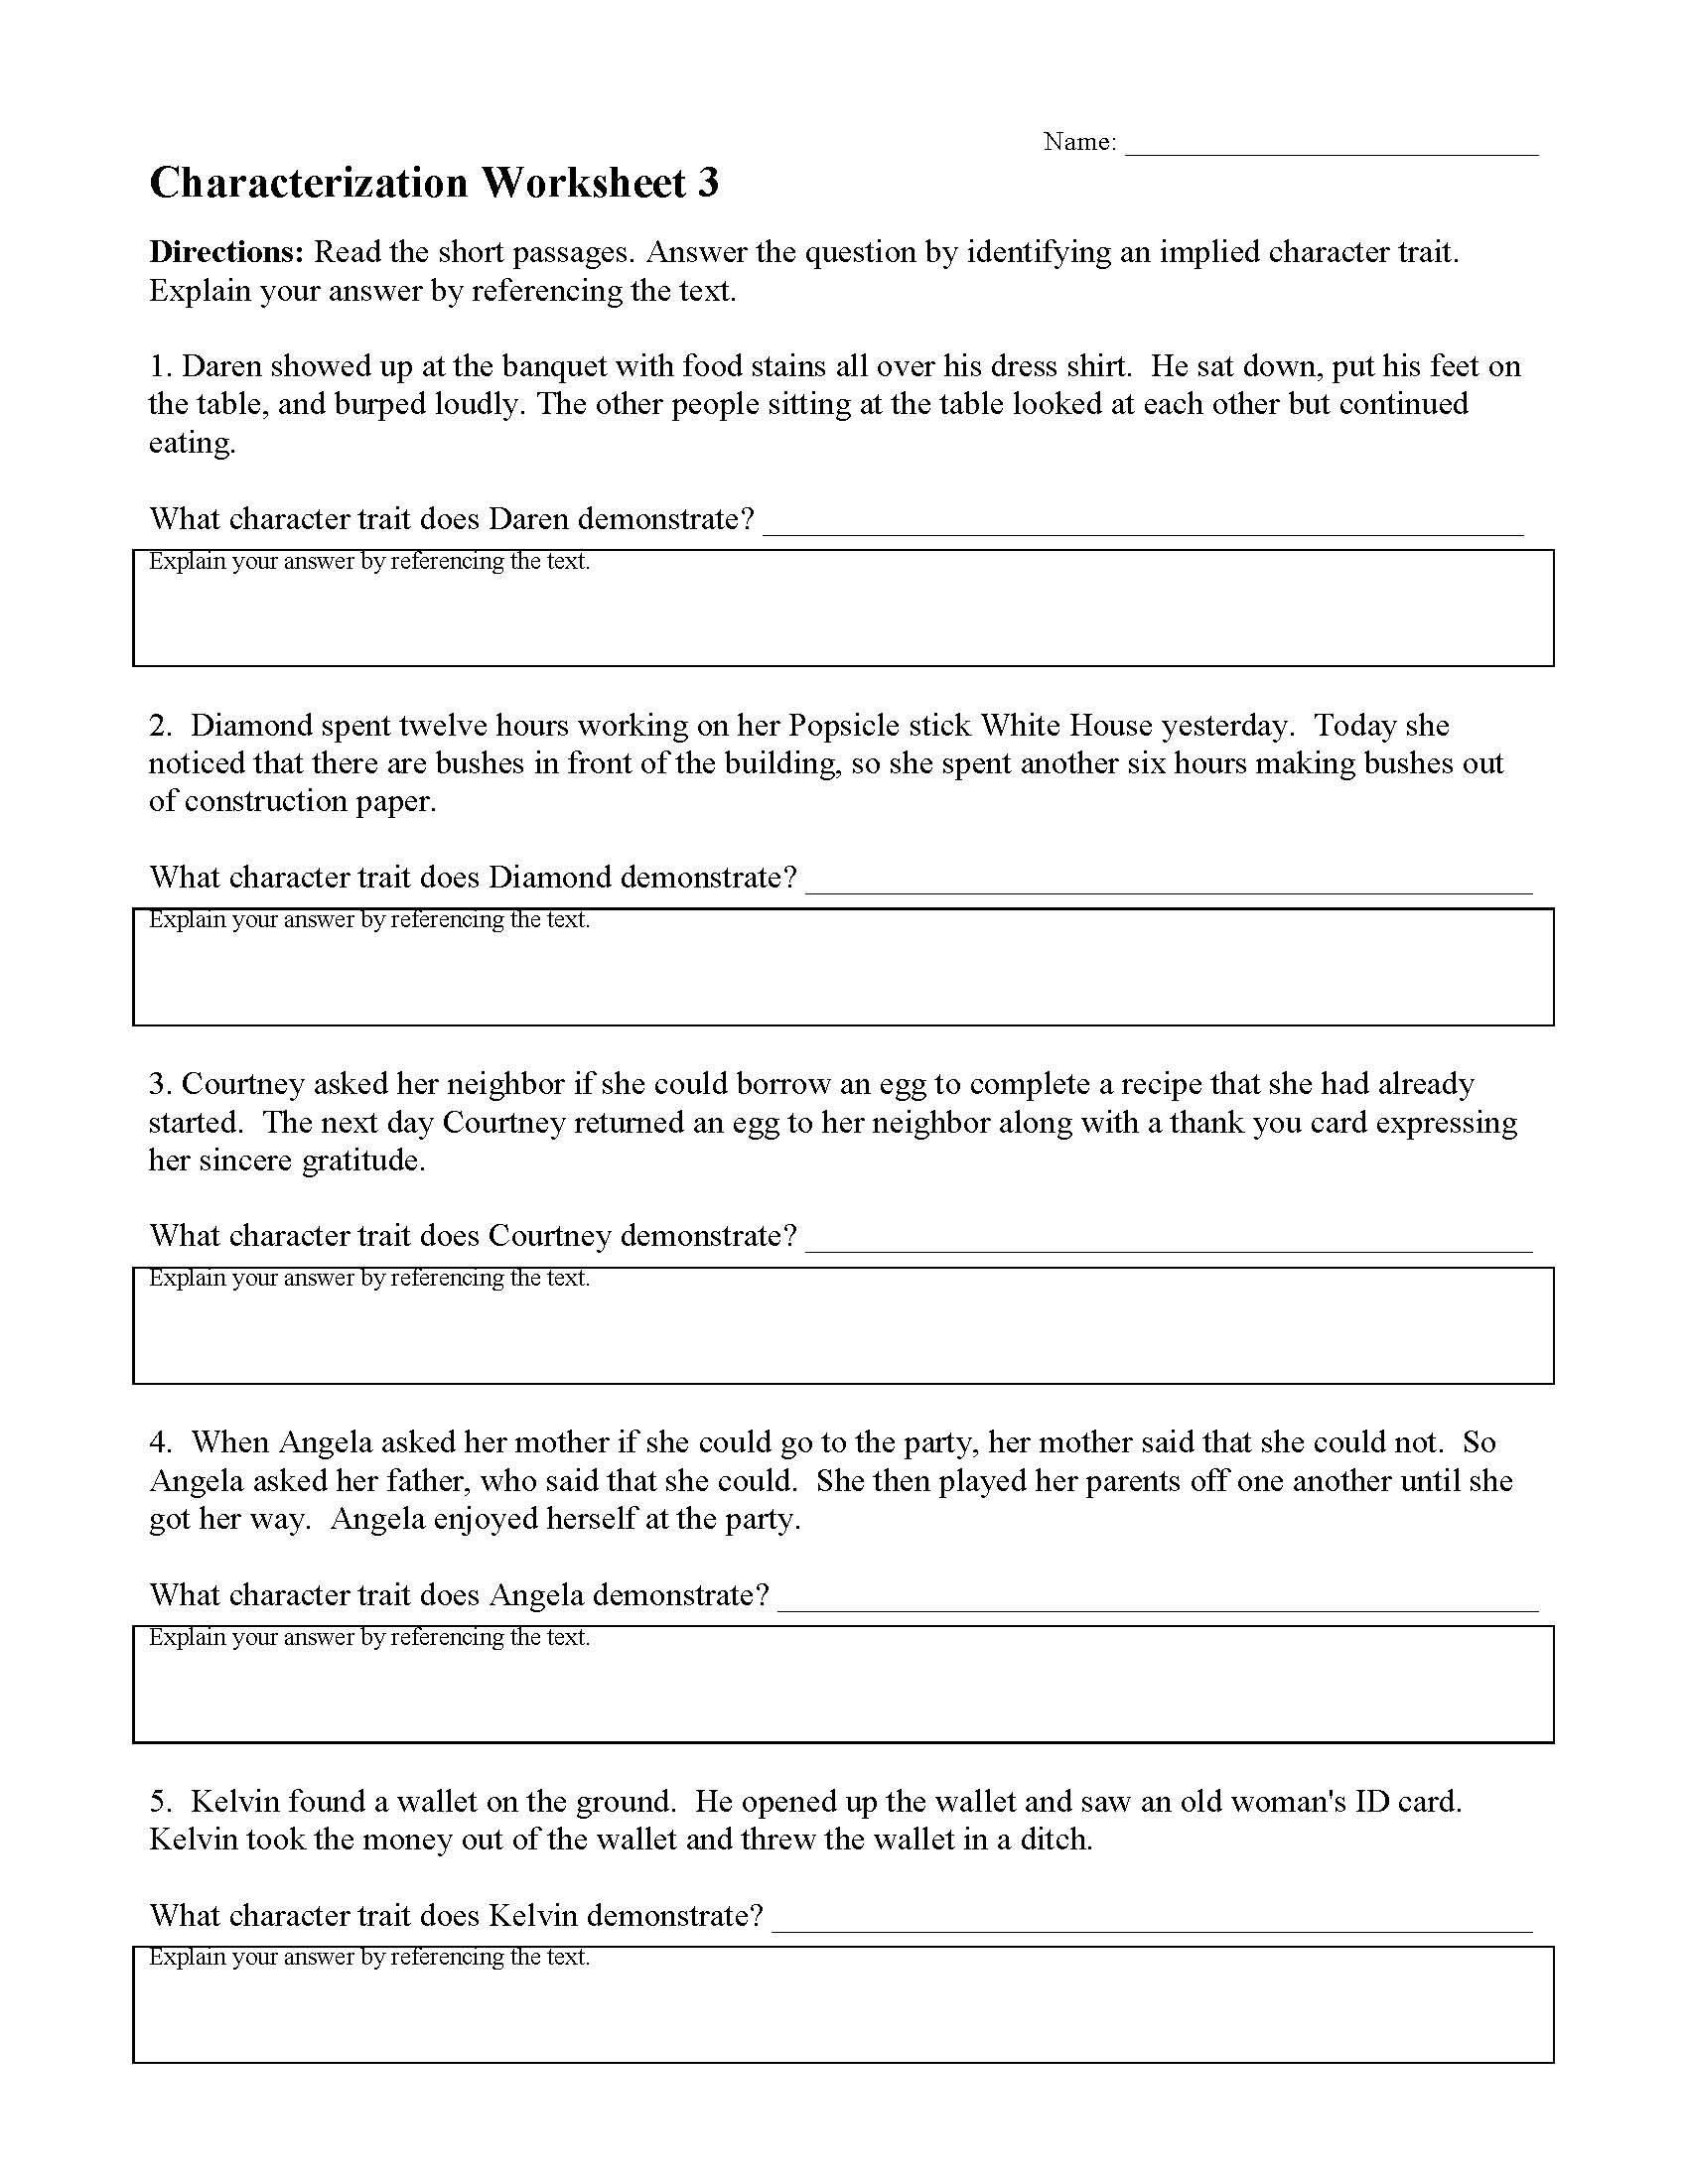 This is a preview image of Characterization Worksheet 3. Click on it to enlarge it or view the source file.